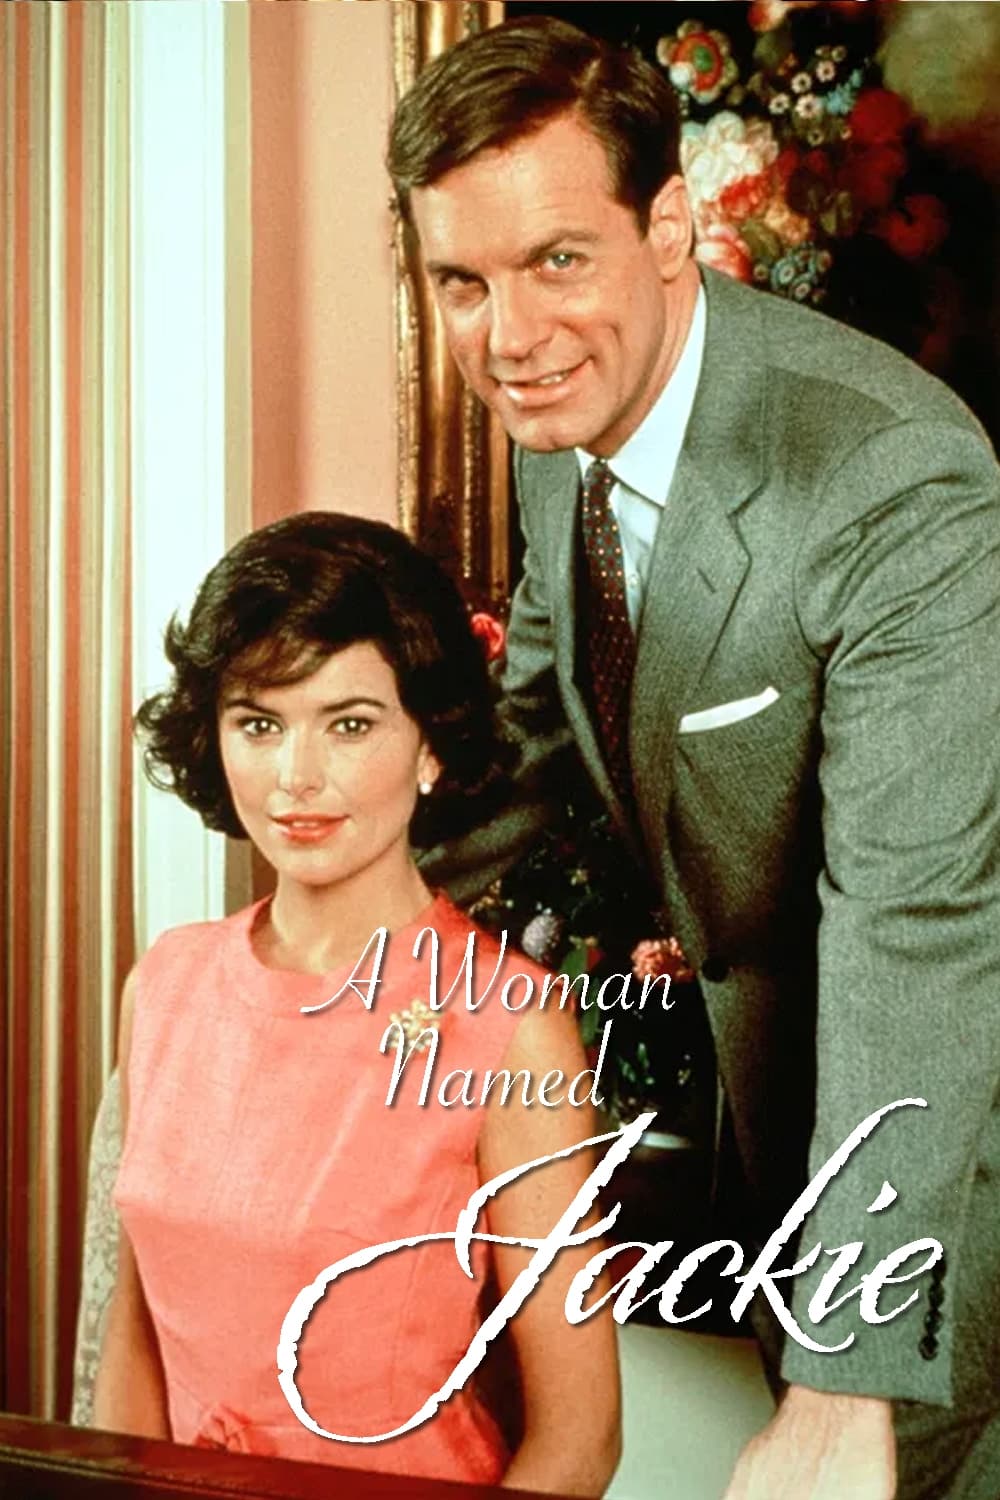 A Woman Named Jackie (1991)